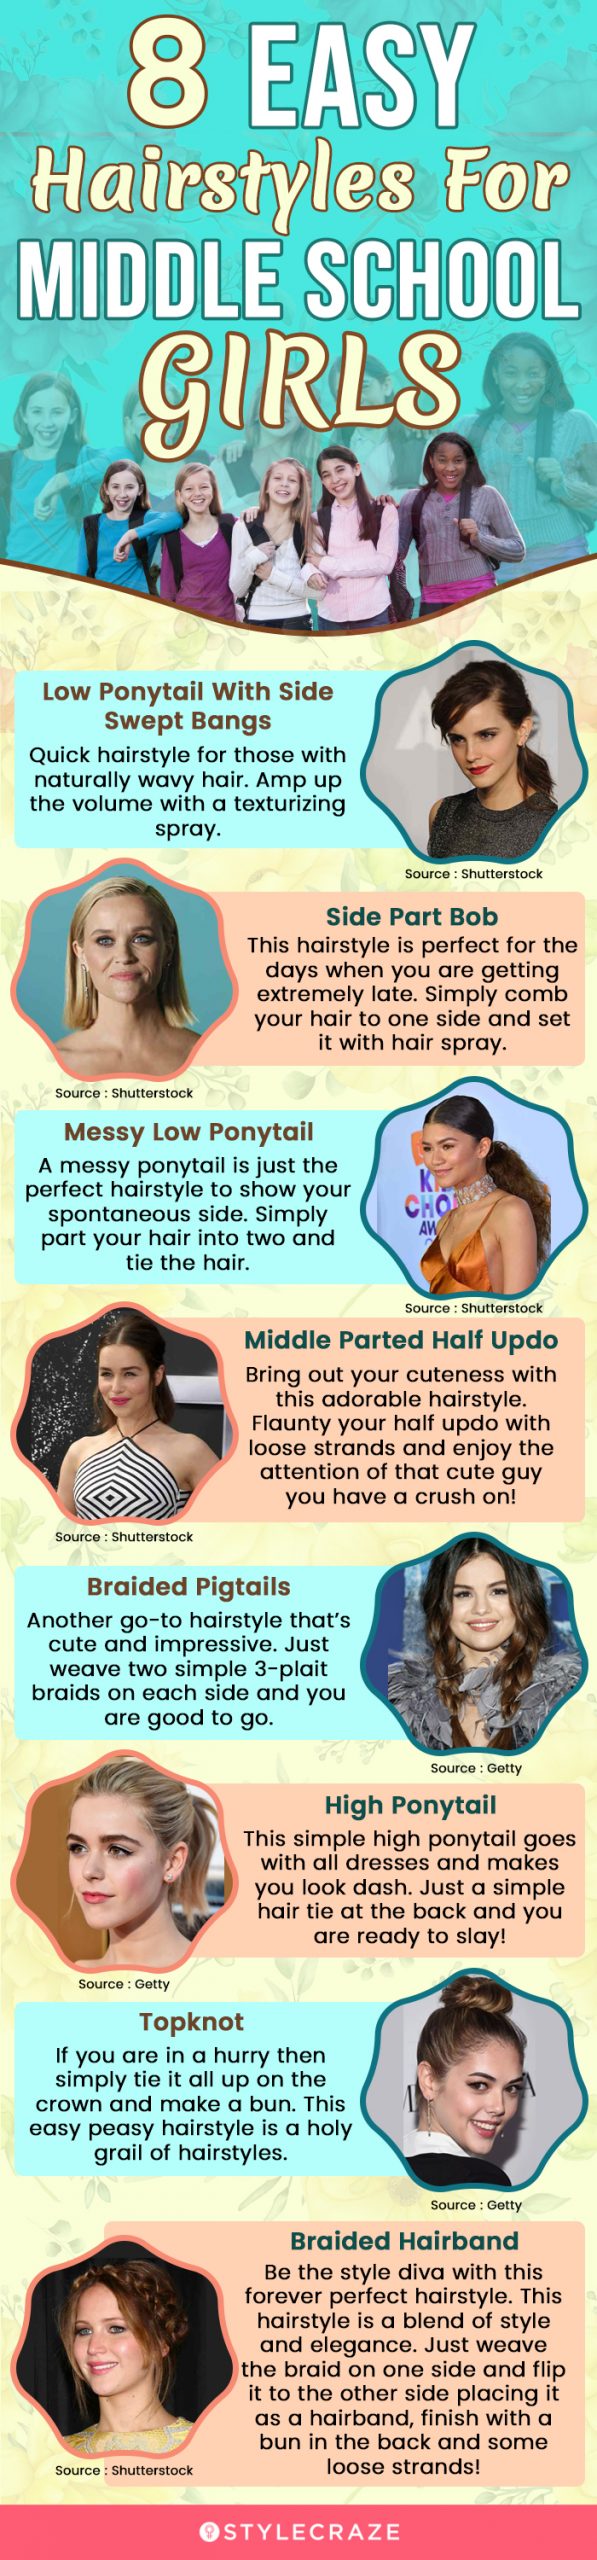 8 easy hairstyles for middle school girls (infographic)